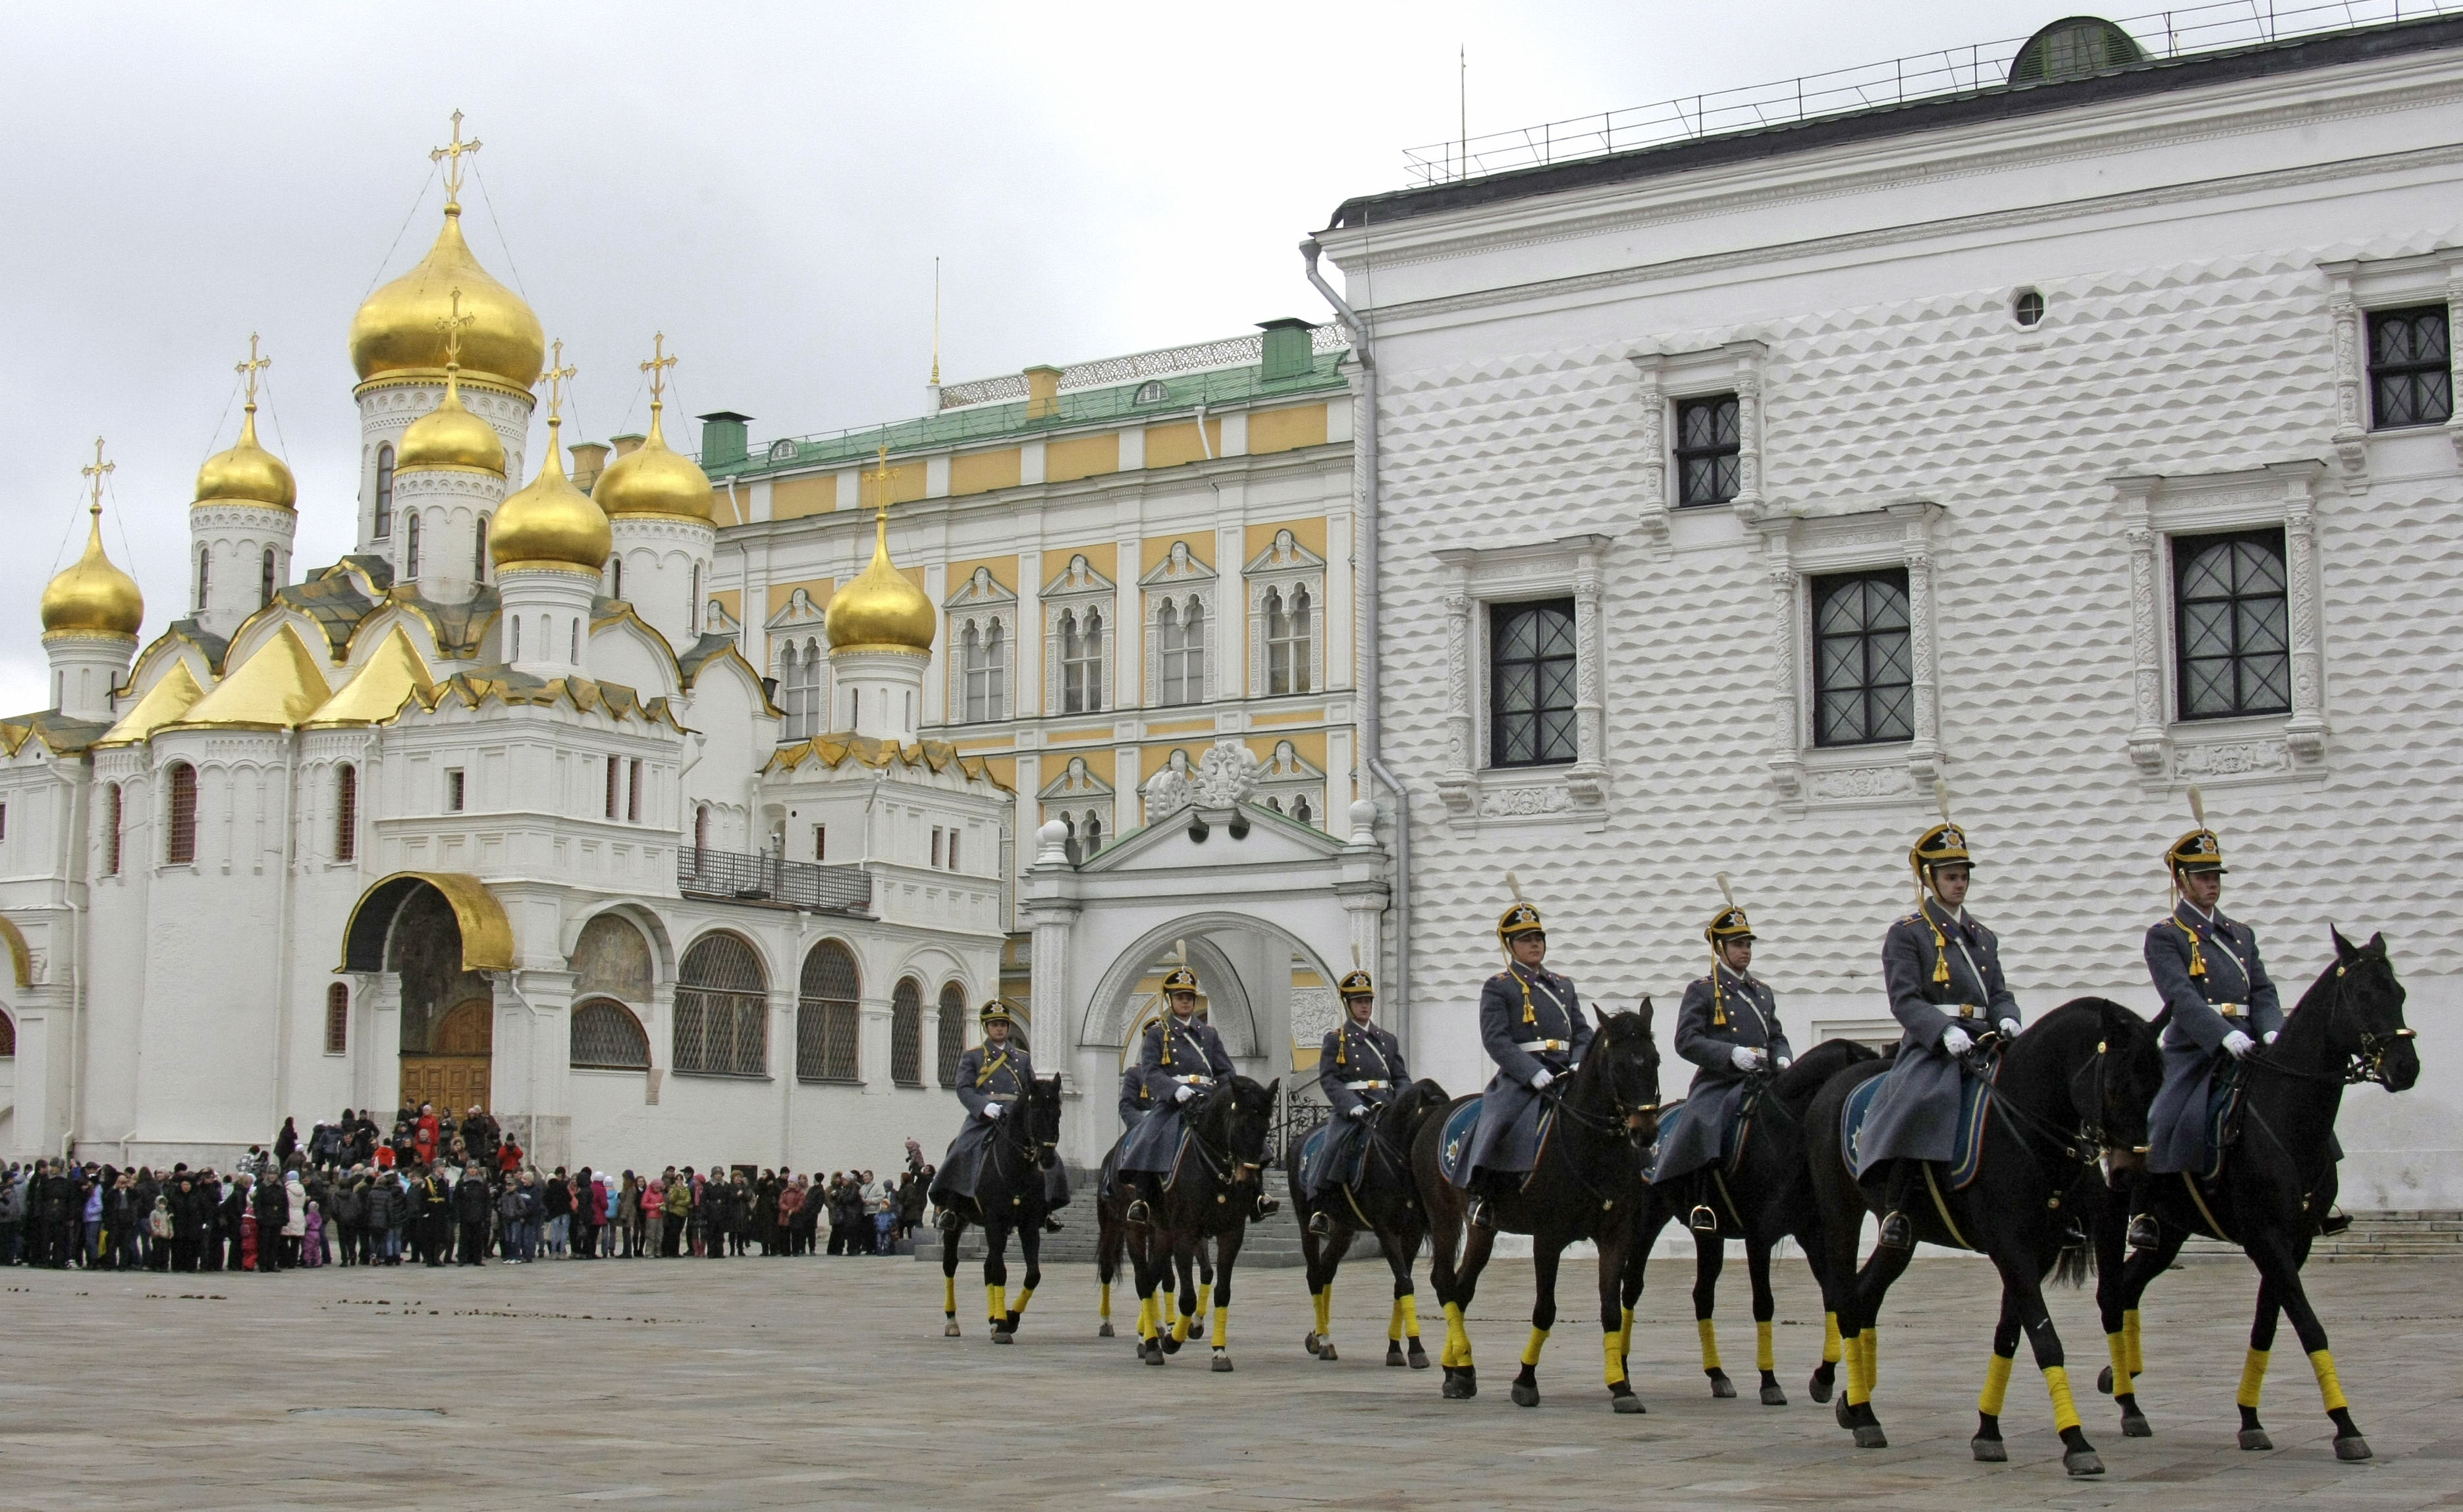 Kremlin cavalry guards parade in Cathedral Square during a ceremony of the Changing of the Guard in front of the Annunciation Cathedral in the Kremlin in Moscow, Russia, Saturday, Oct. 30, 2010. Saturday's czarist-style ceremony, the last of the season, was inaugurated by the Kremlin last April to pull in tourists. The Kremlin guards were wearing uniforms designed to resemble Russian military uniforms used at the time of Czar Nicholas II in 1907-1913. (AP Photo/Mikhail Metzel)